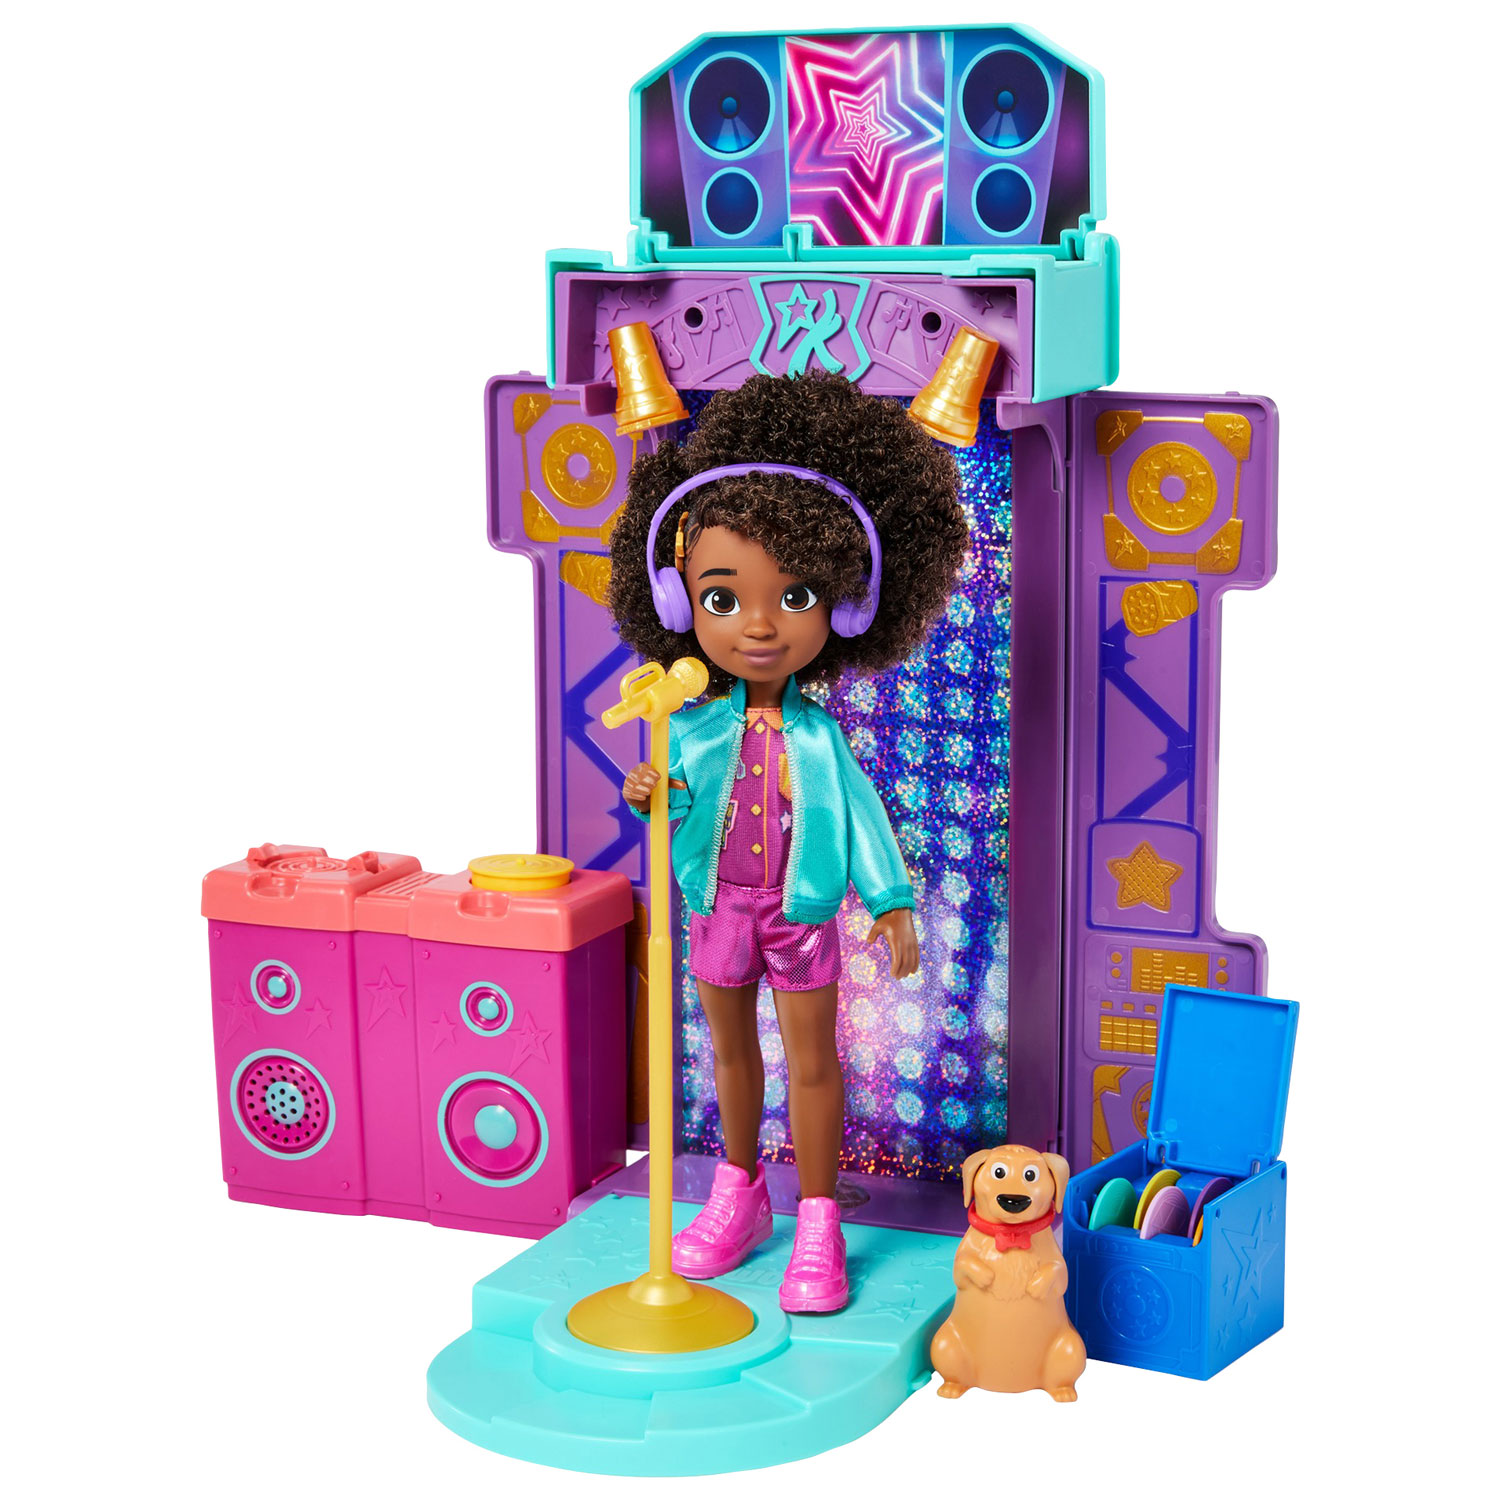 Mattel Launches 'Karma's World' Doll Collection Featuring Vibrant